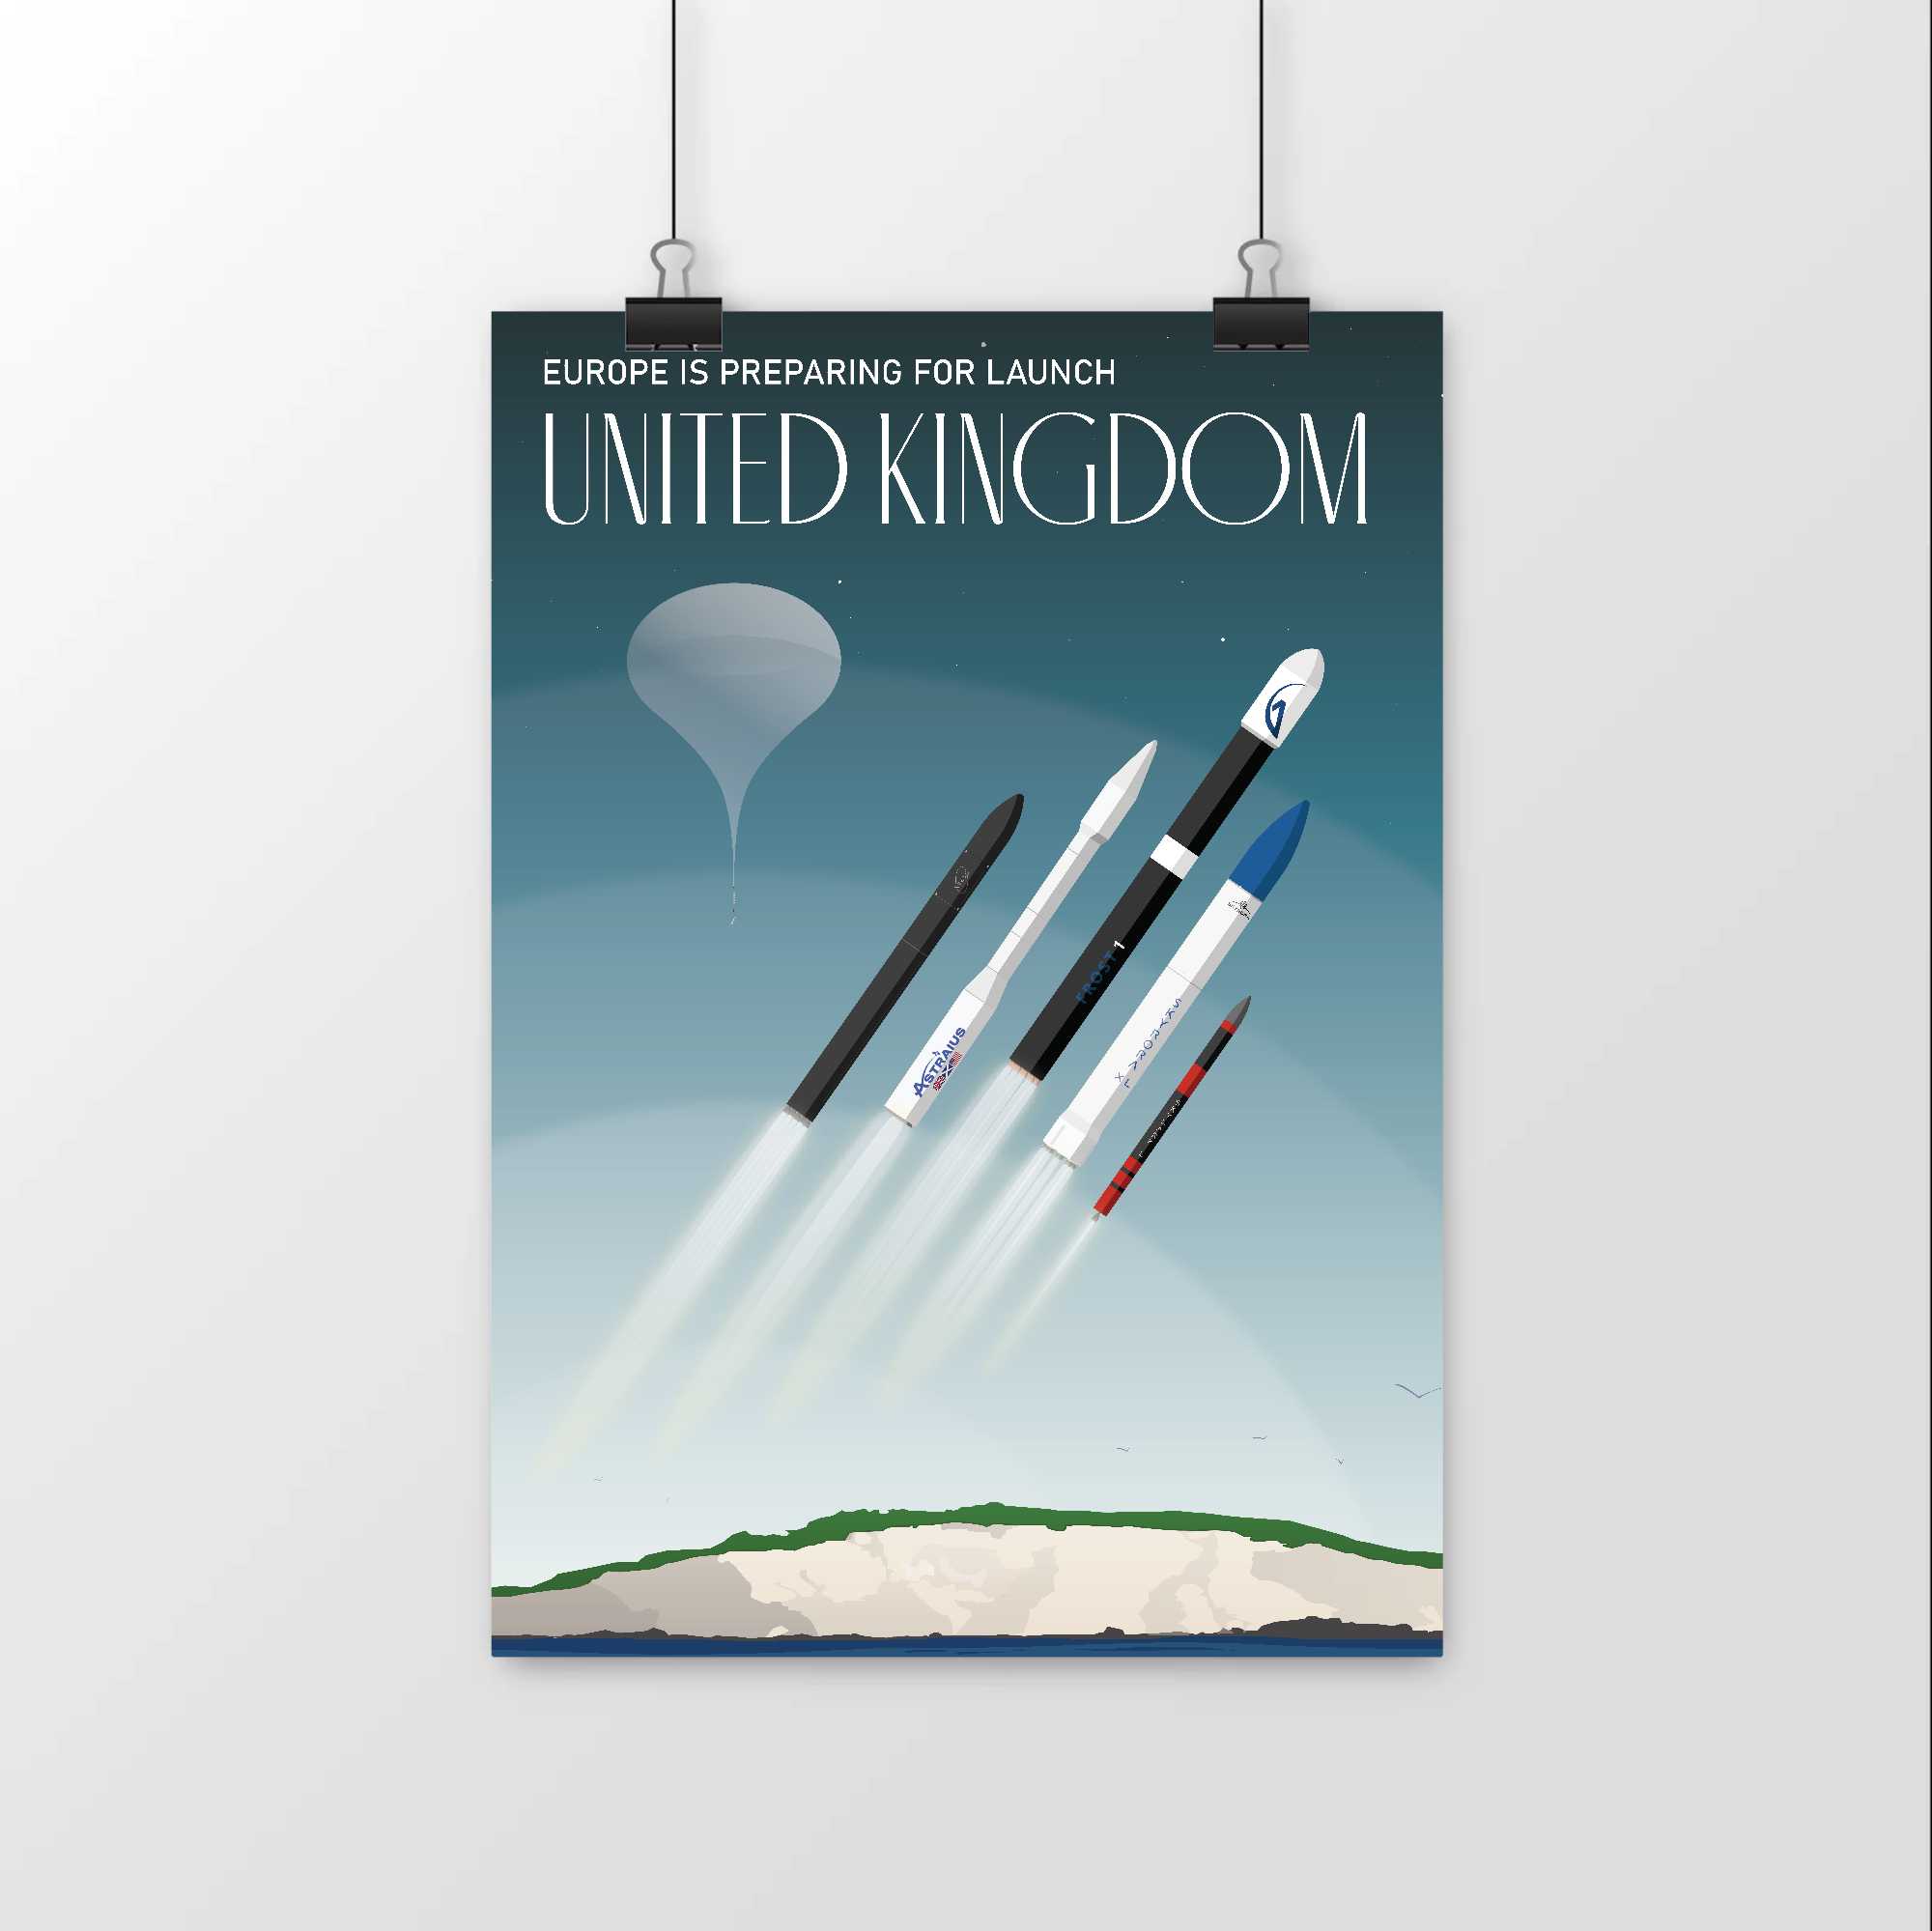 European Spaceflight Europe is preparing for launch posters: UK Launch Poster.